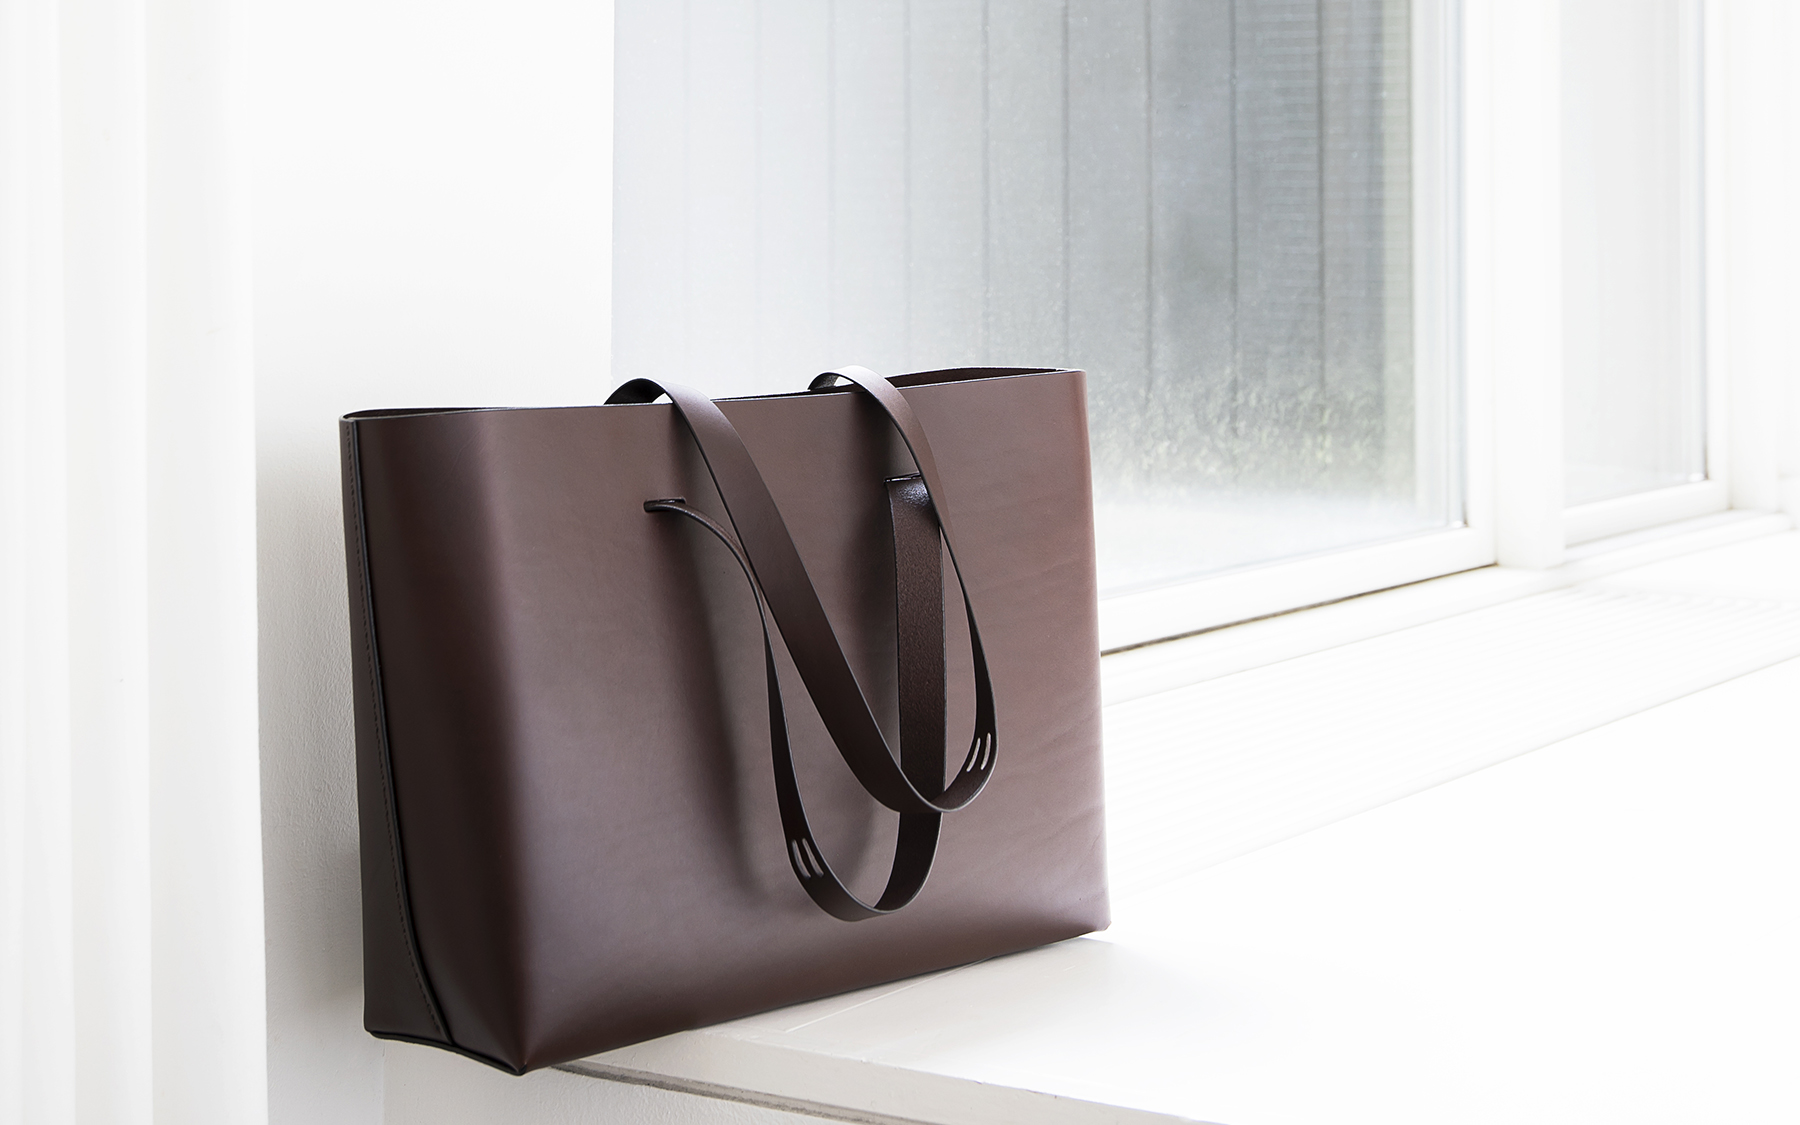 CUT bag by Lars Vejen for Leather By Hands 01